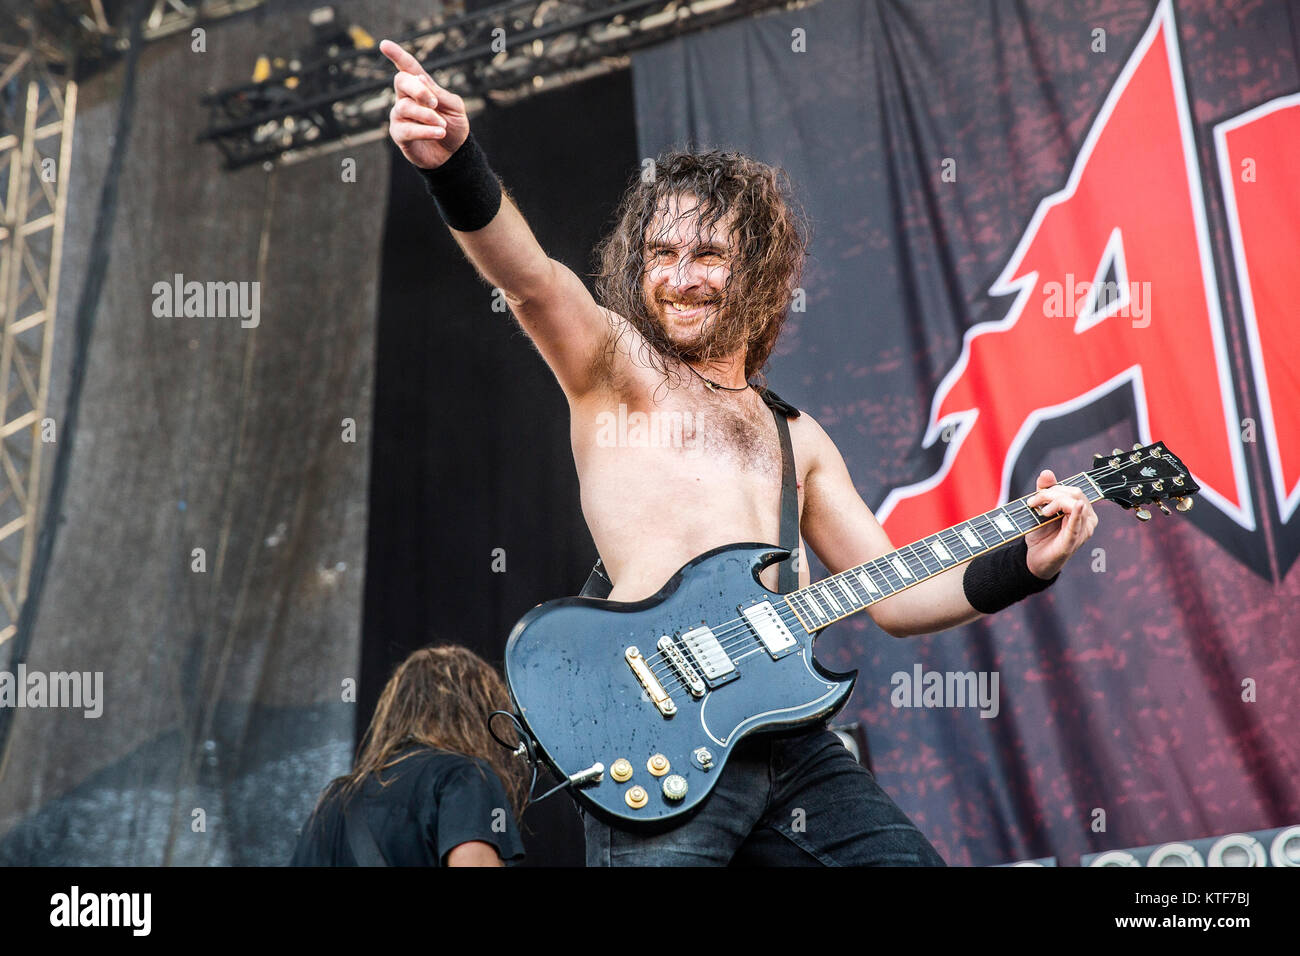 Norway, Halden – June 24, 2017.  The Australian rock band Airbourne performs a live concert during the Norwegian music festival Tons of Rock 2017. Here vocalist and guitarist Joel O’Keeffe is seen live on stage. Stock Photo